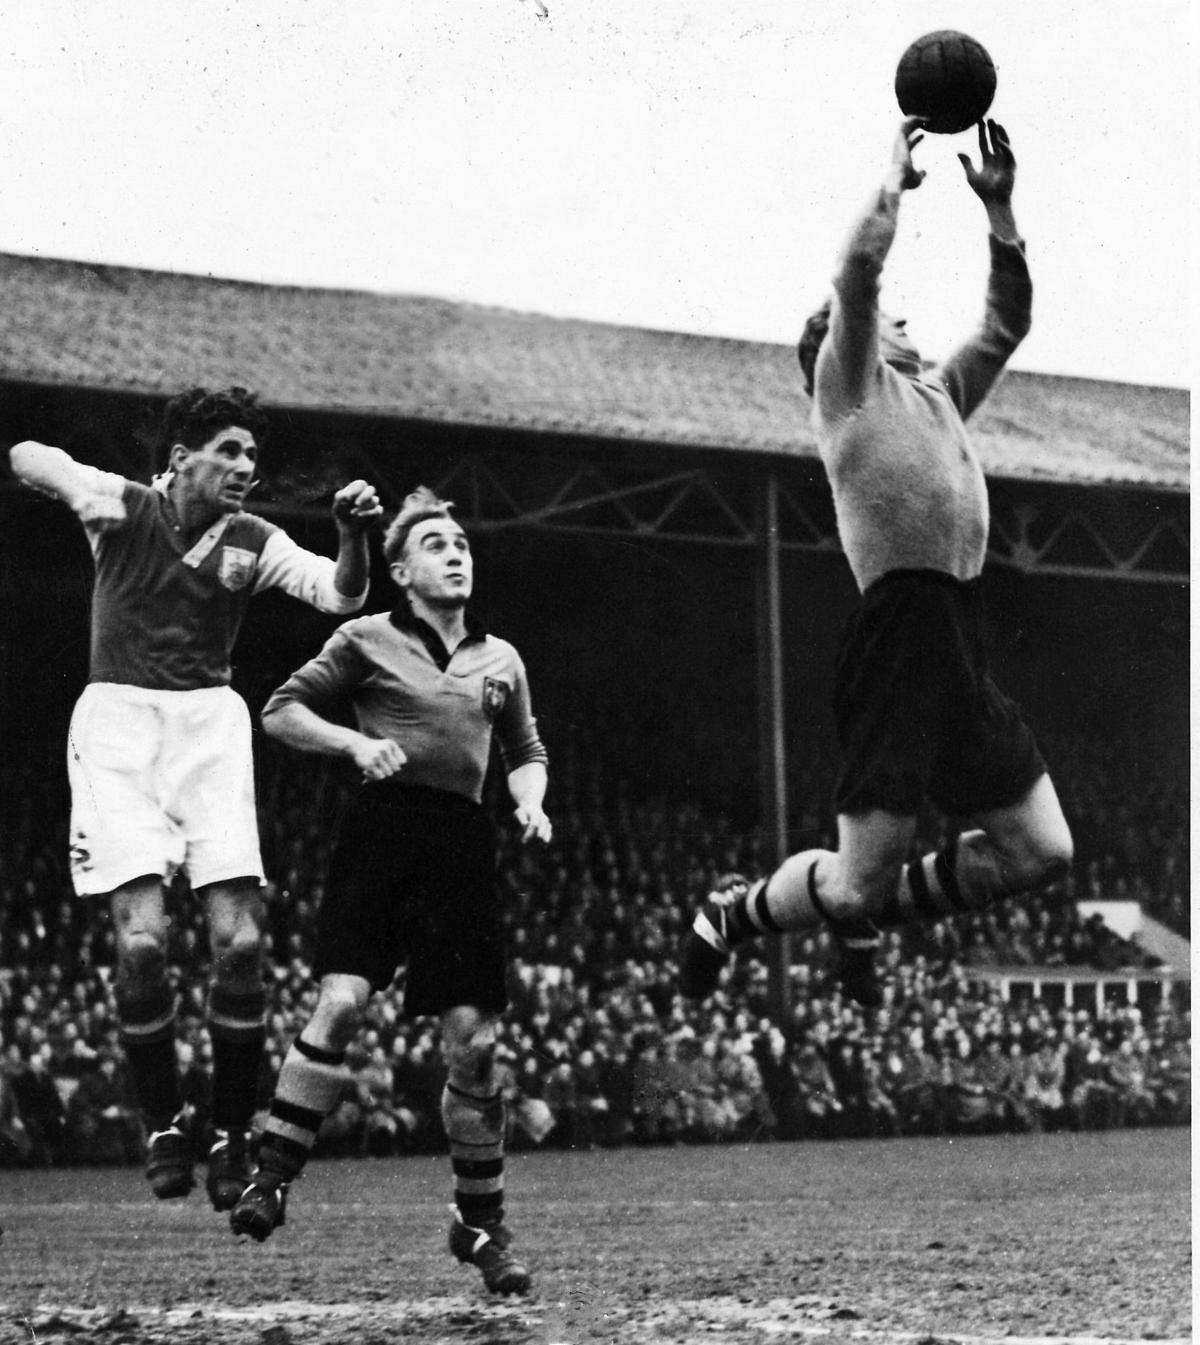 Bournemouth and Boscombe Athletic  v Wolves in cup tie Jan 10th 1948.  A selection of the images that are featured in the Daily Echo, AFC Bournemouth Photographic Book.